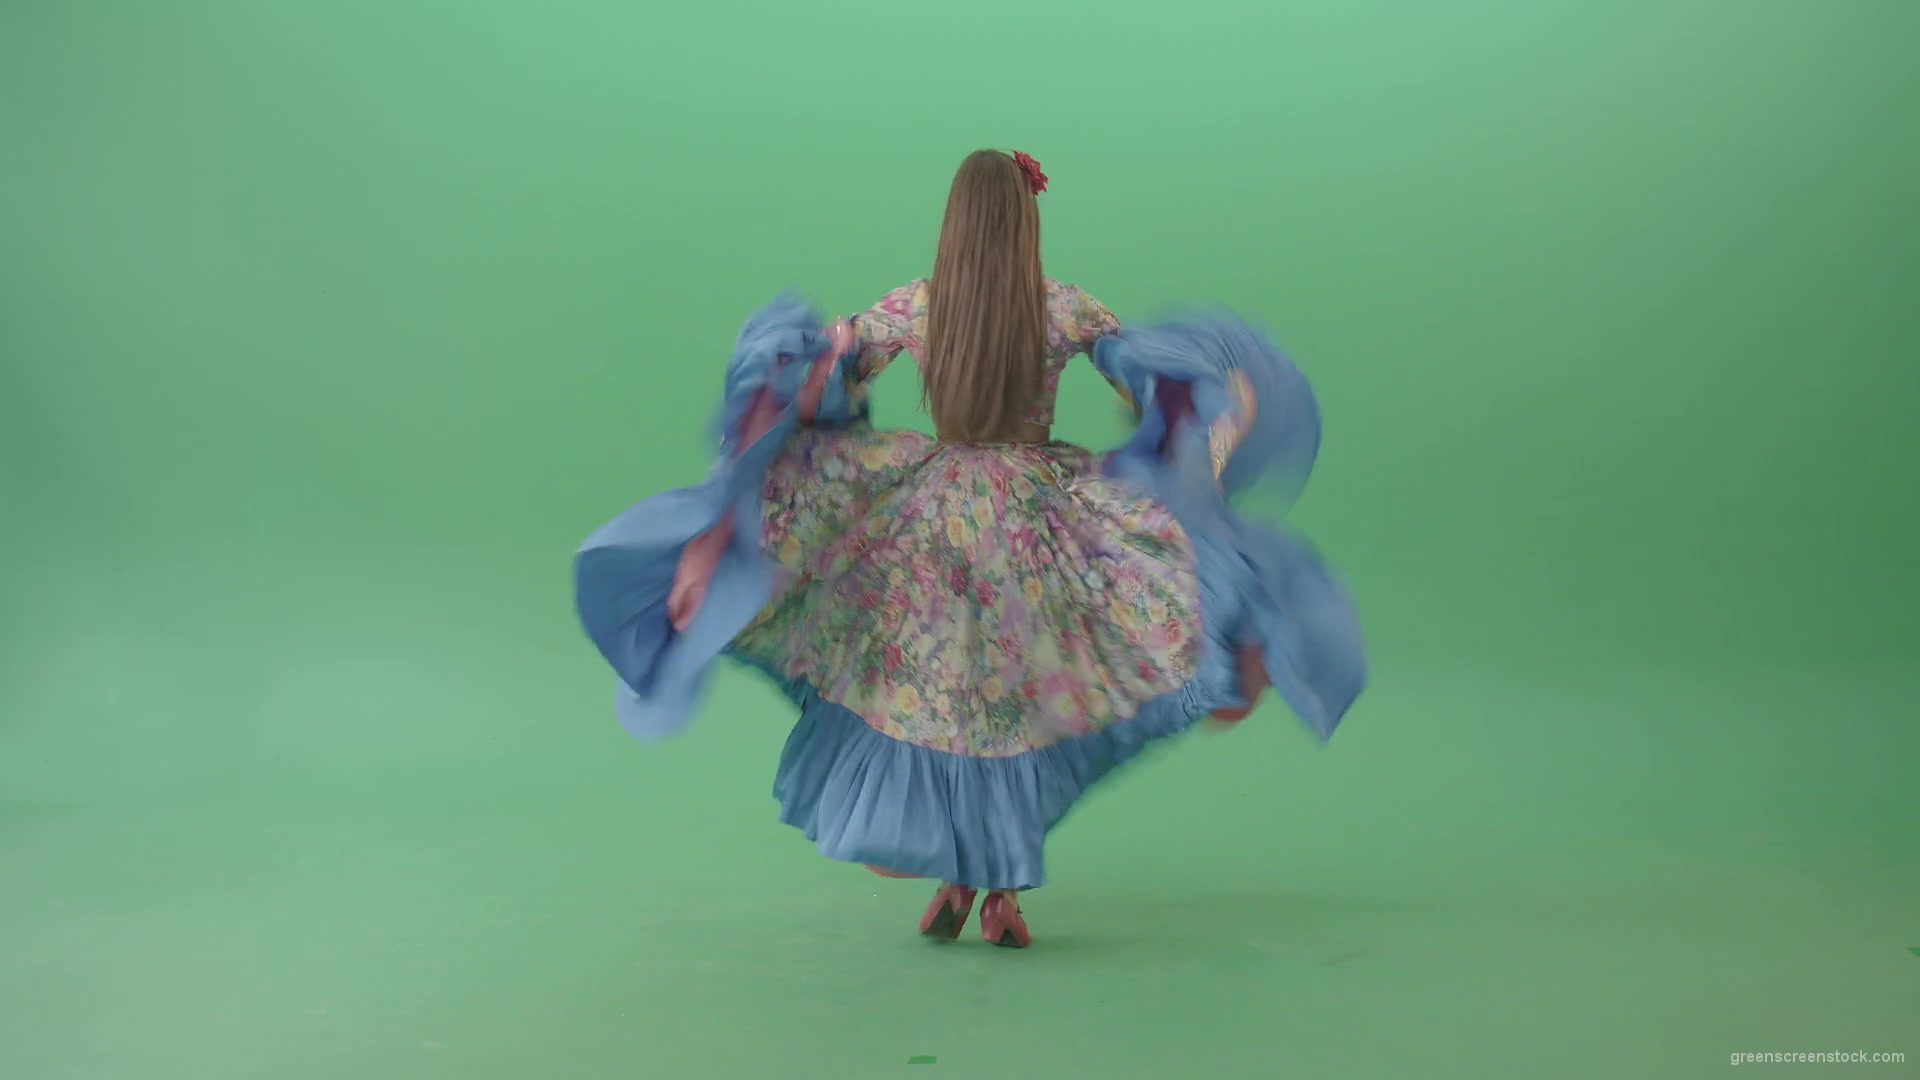 Dancing-gipsy-girl-waving-balkan-dress-from-back-view-isolated-on-green-screen-4K-Video-Stock-Footage-1920_004 Green Screen Stock